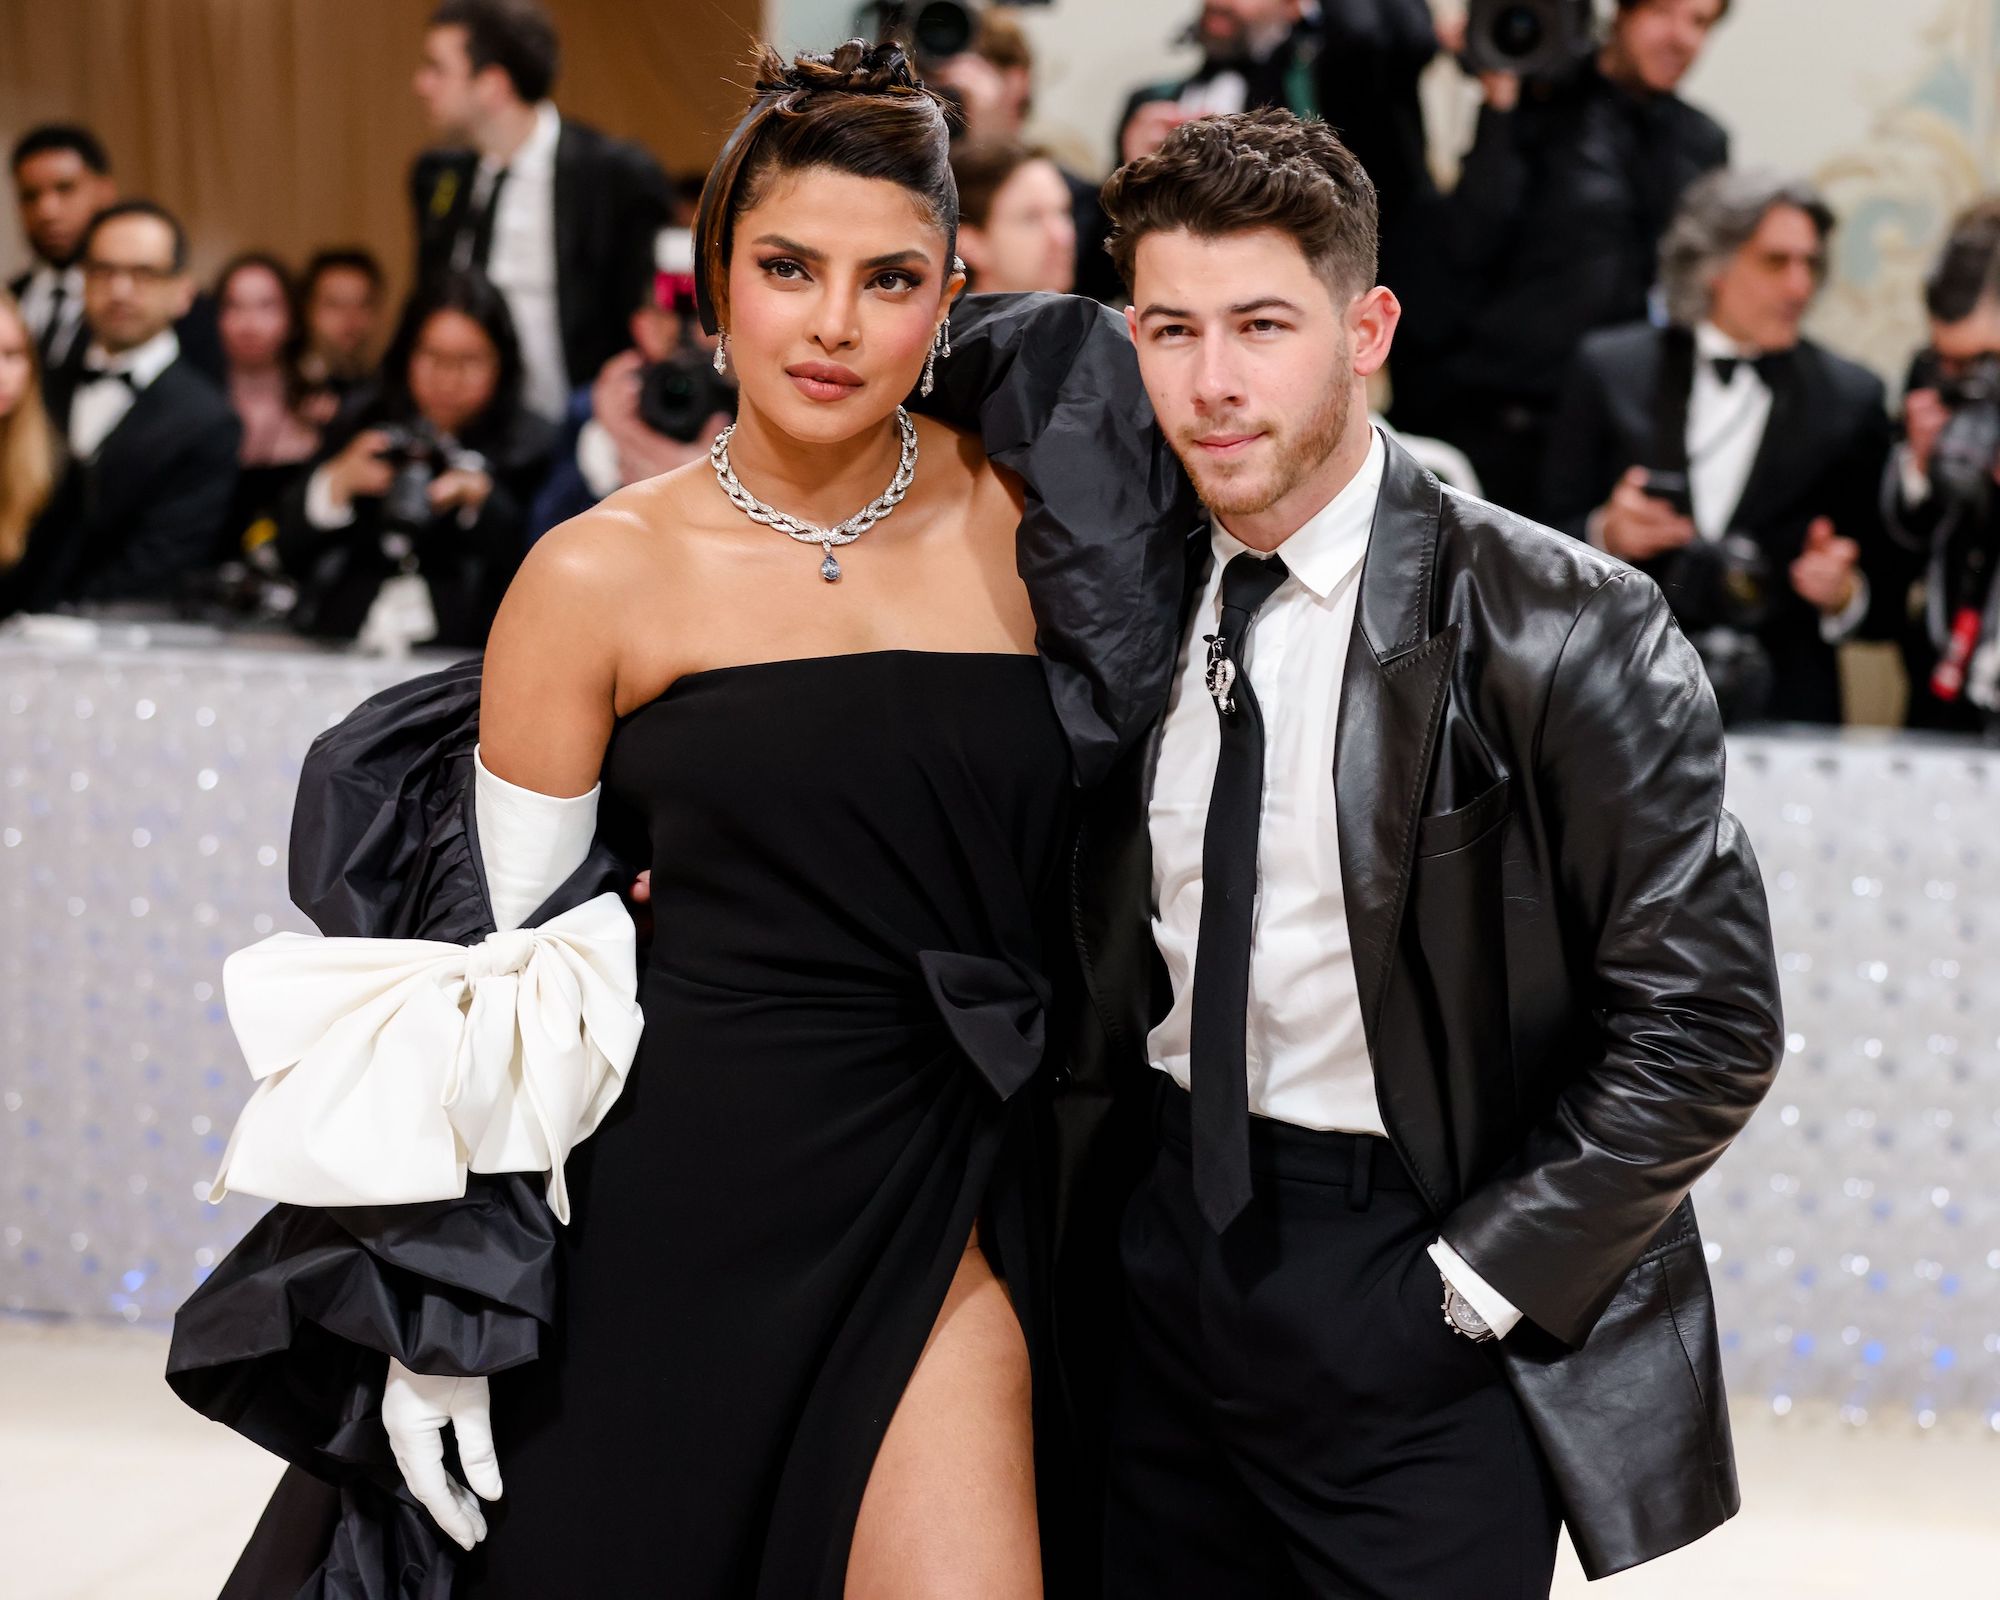 Priyanka Chopra Says She Was Once Passed Over for a Role Because